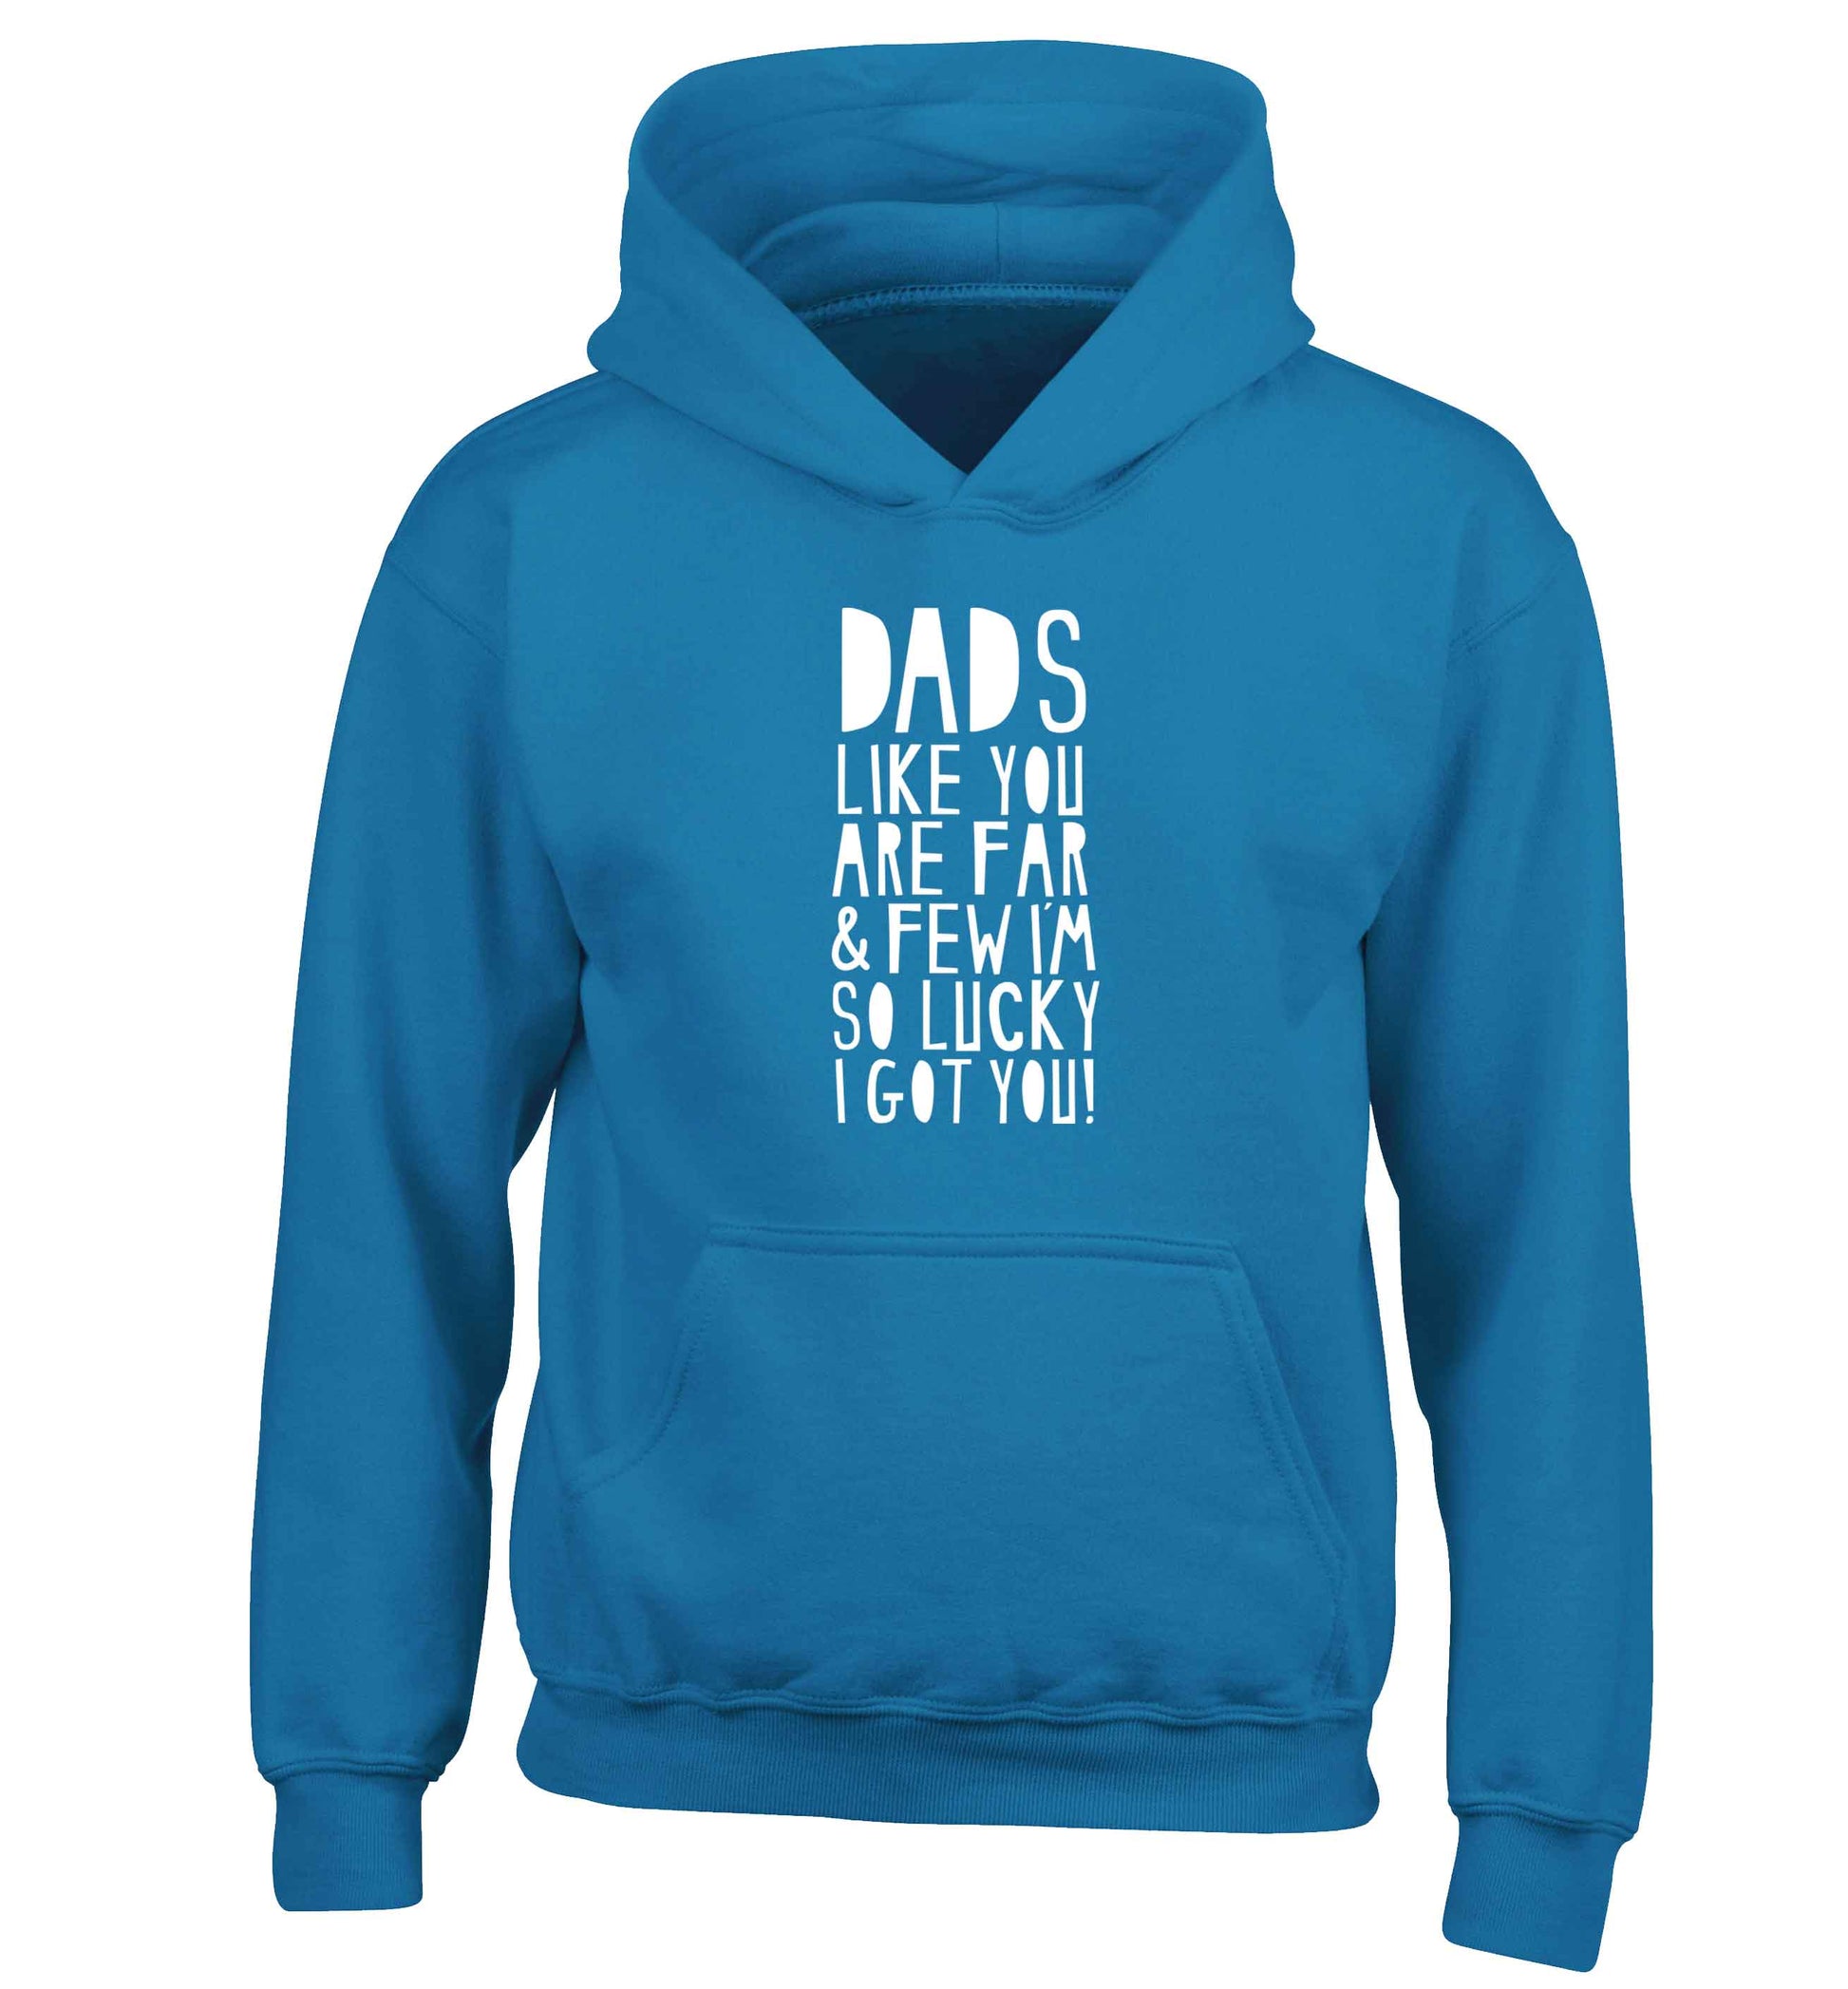 Dads like you are far and few I'm so luck I got you! children's blue hoodie 12-13 Years